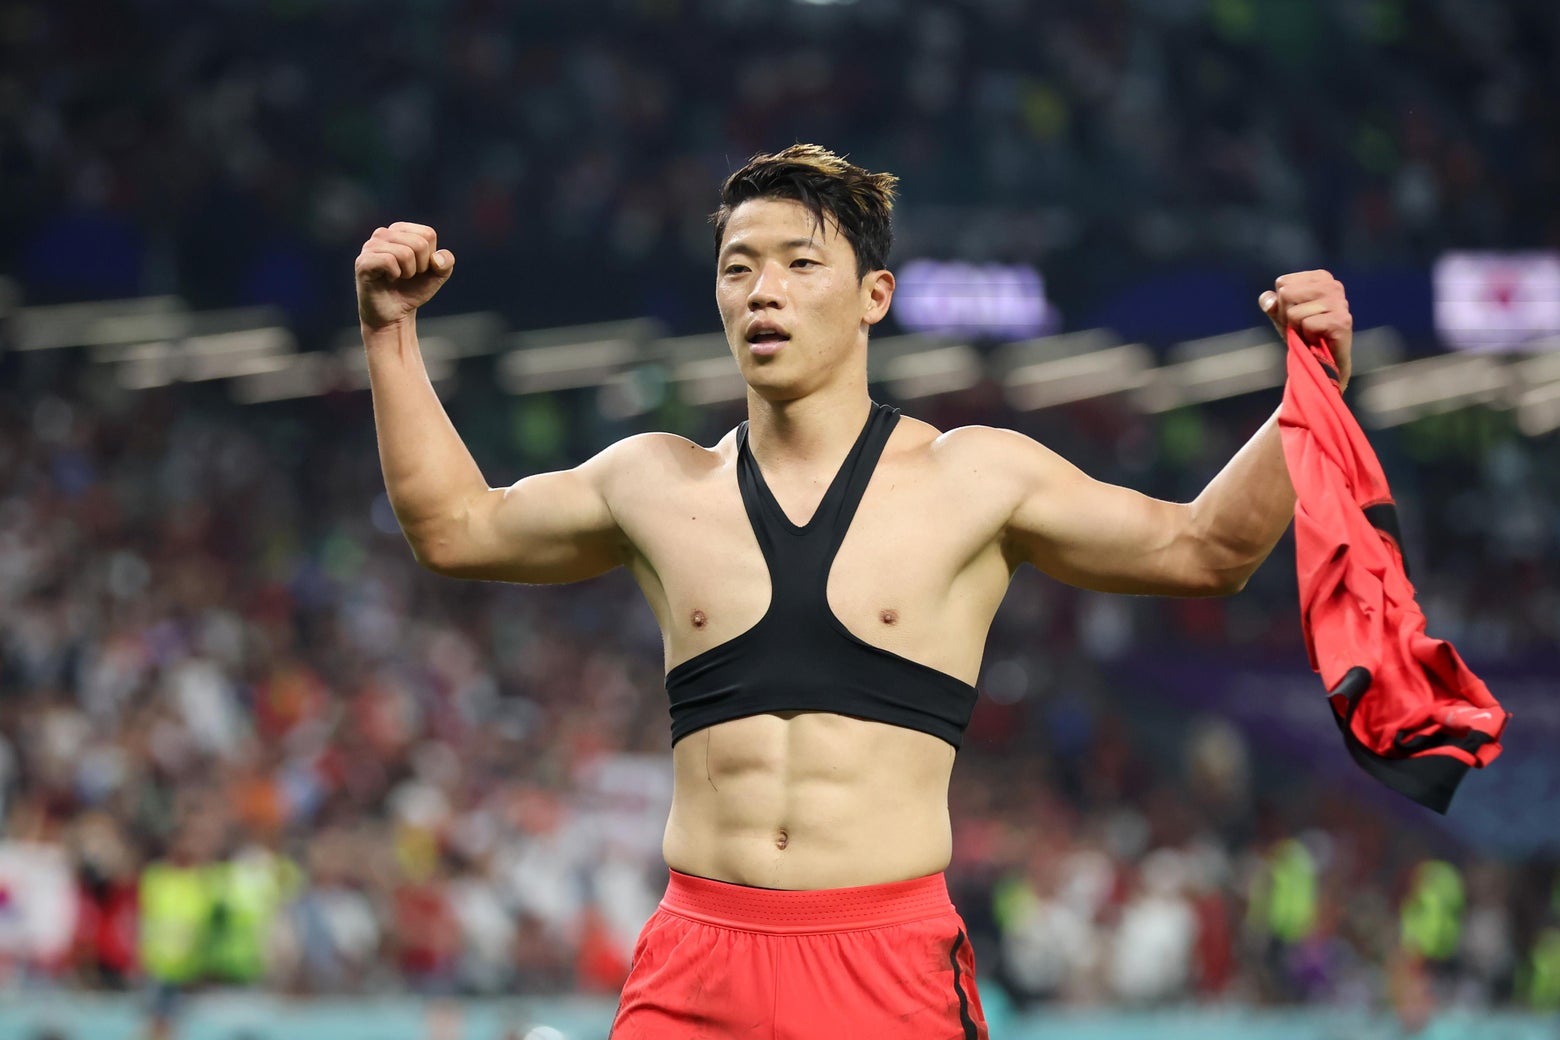 soccer sports bras: Why they those harnesses?